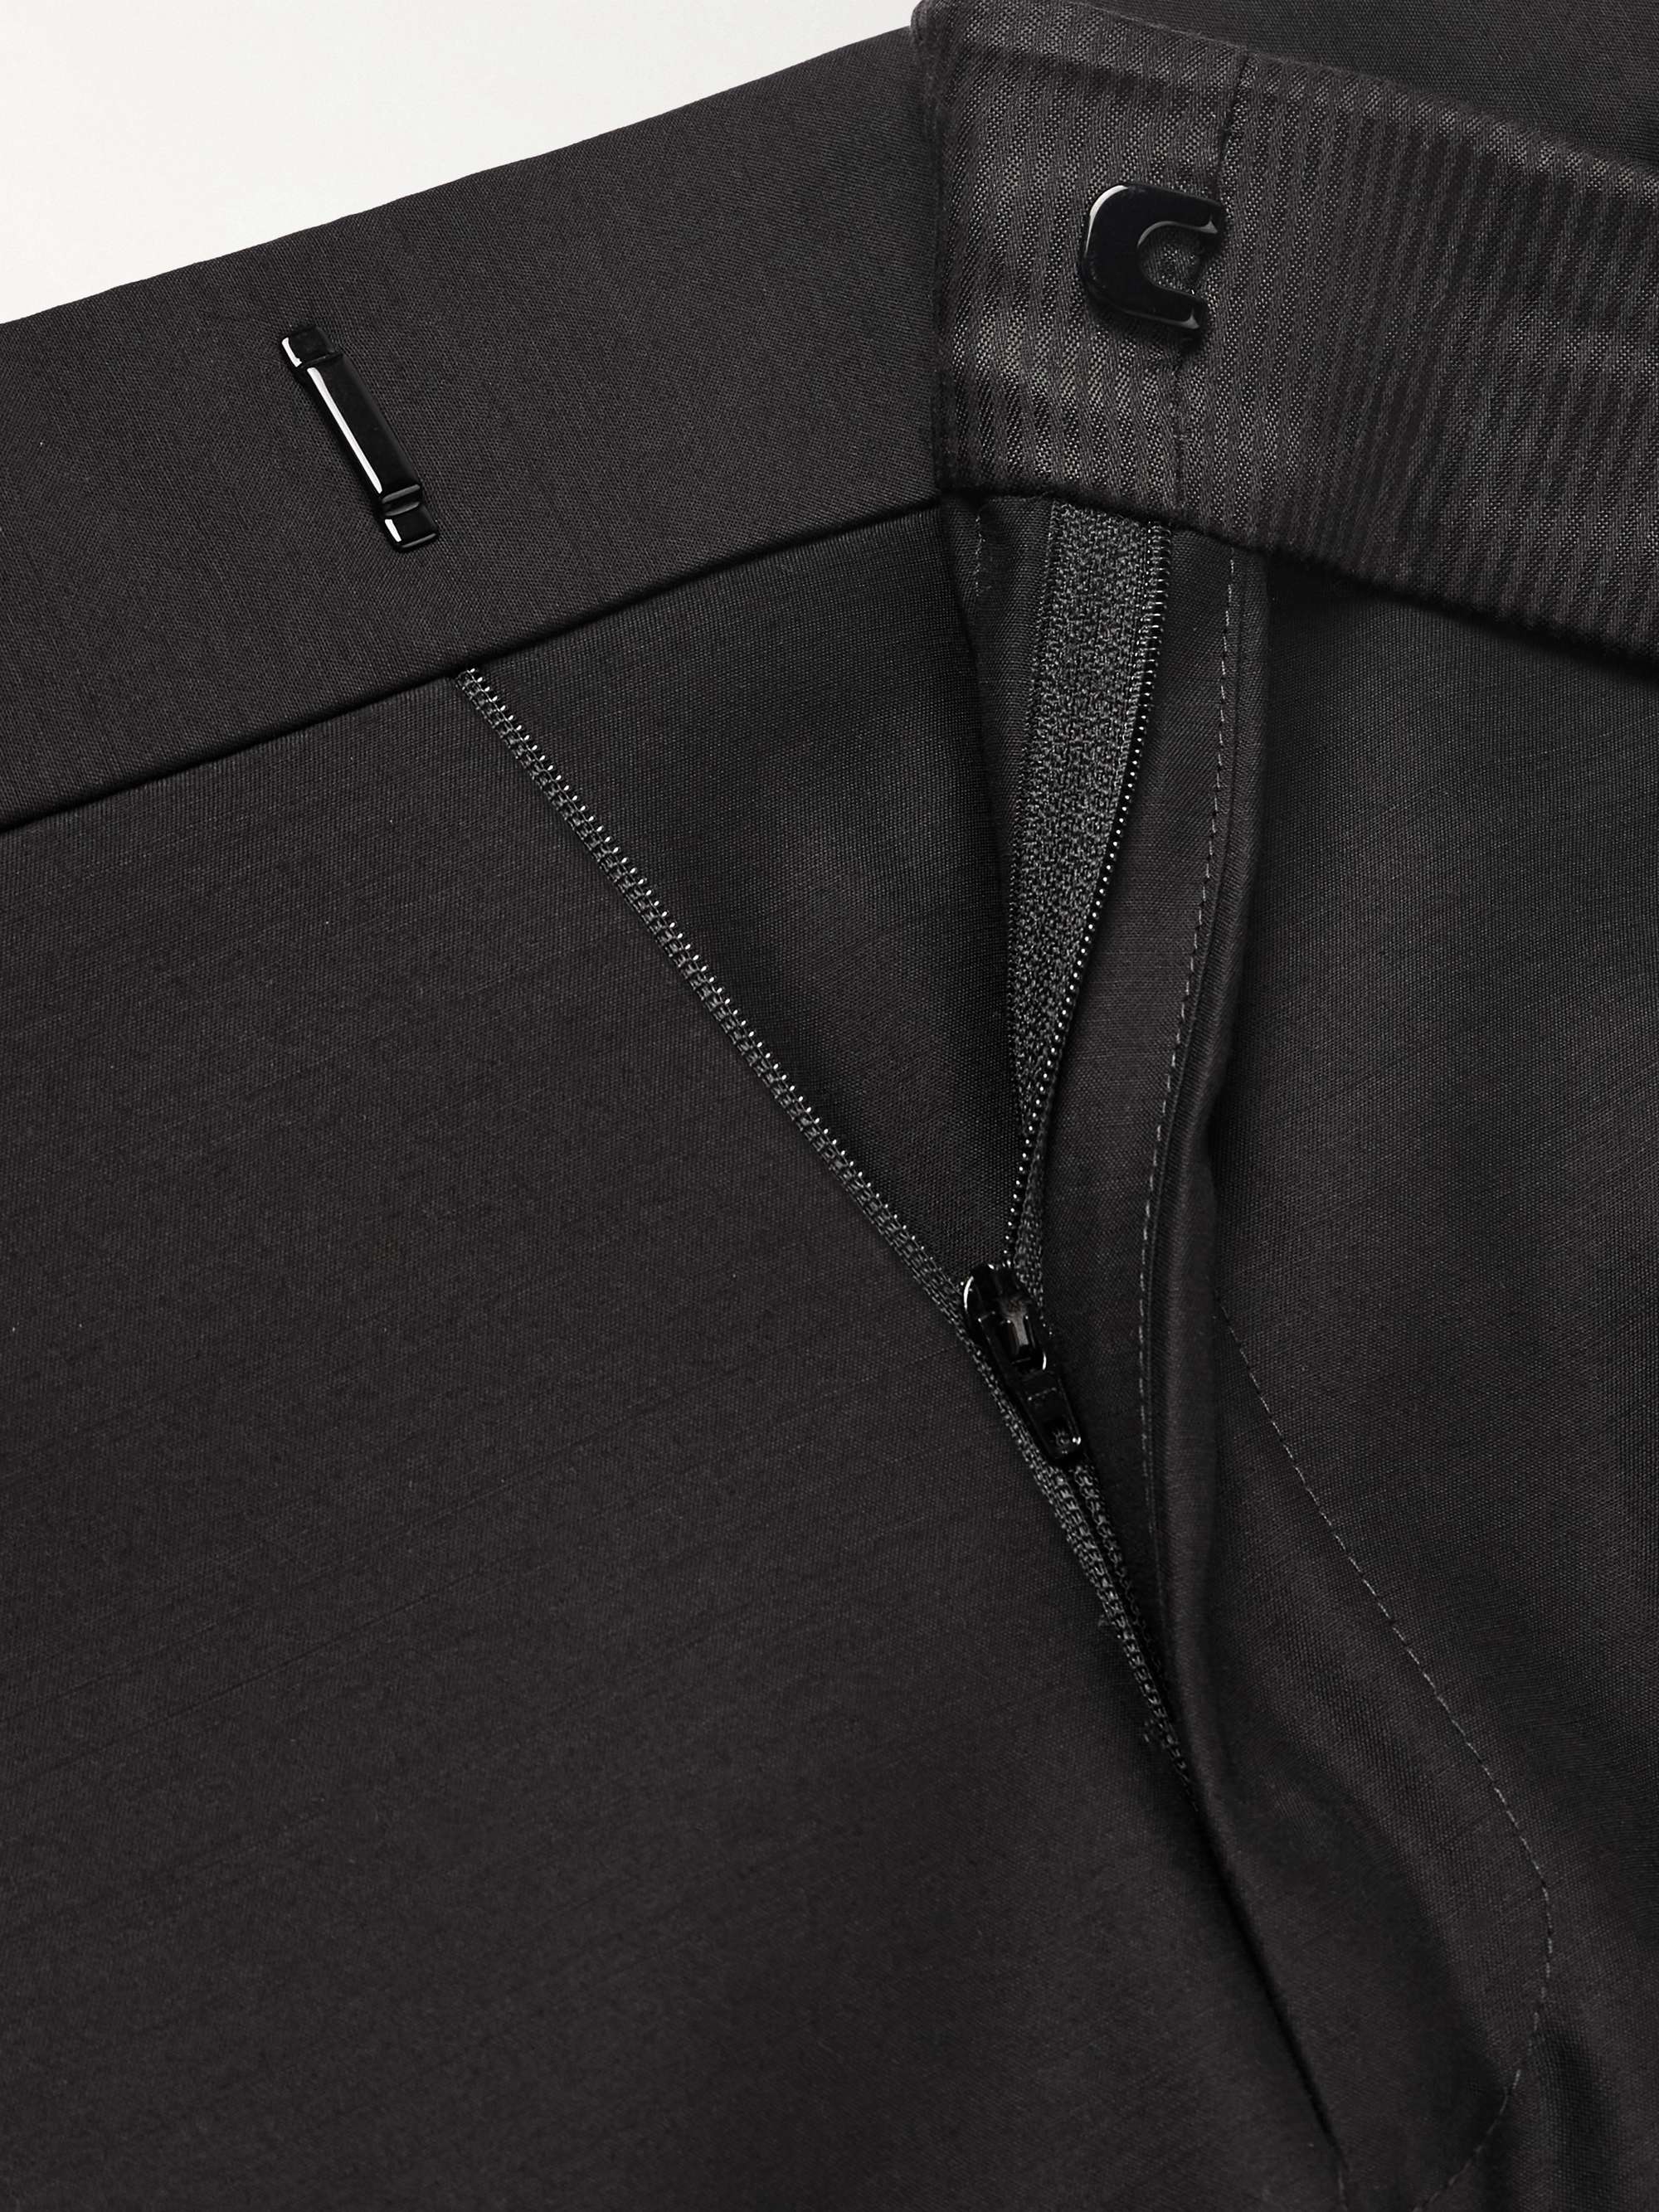 TOM FORD Slim-Fit Wool and Silk-Blend Suit Trousers for Men | MR PORTER